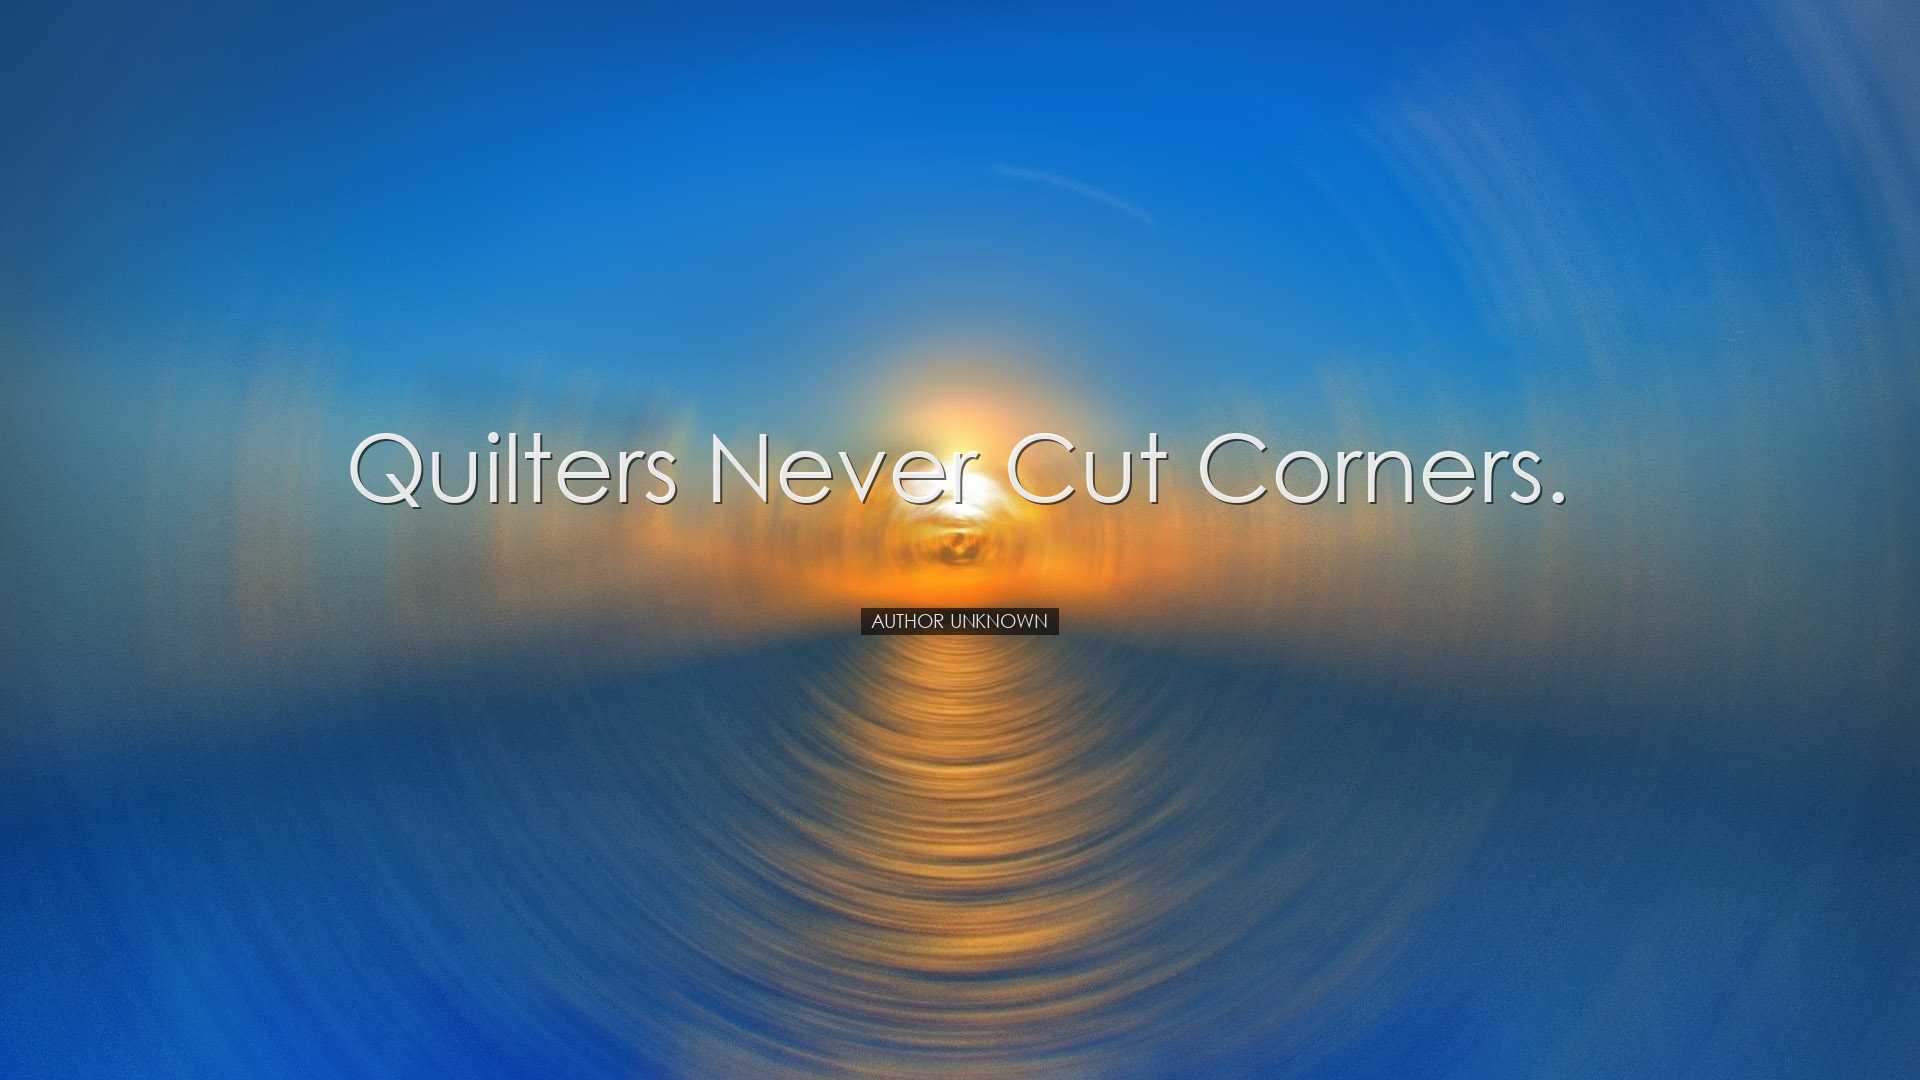 Quilters never cut corners. - Author Unknown